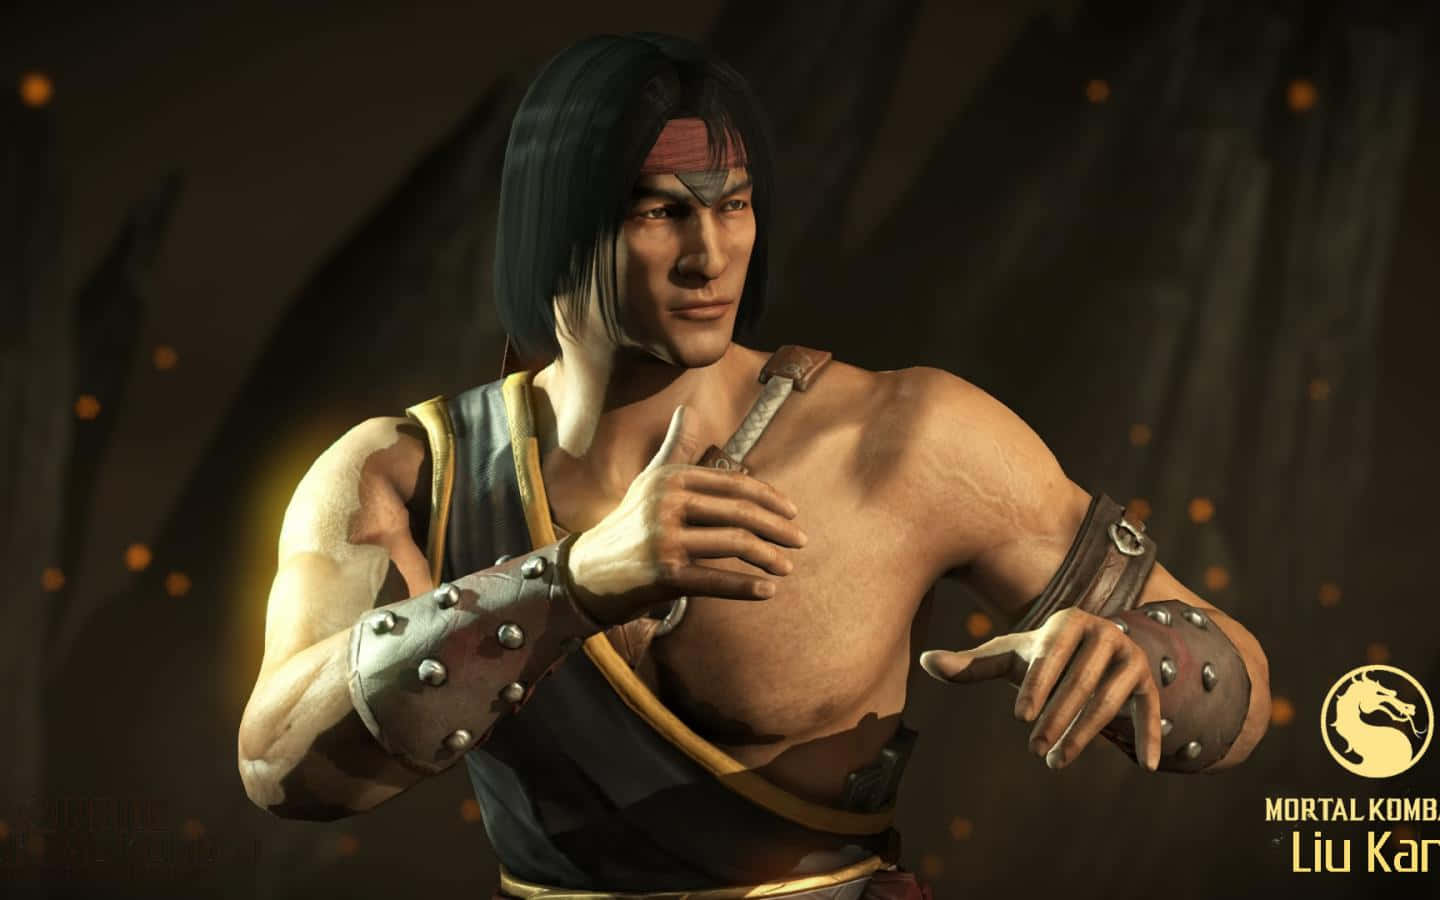 The iconic fighter, Liu Kang, poised for action in Mortal Kombat Wallpaper